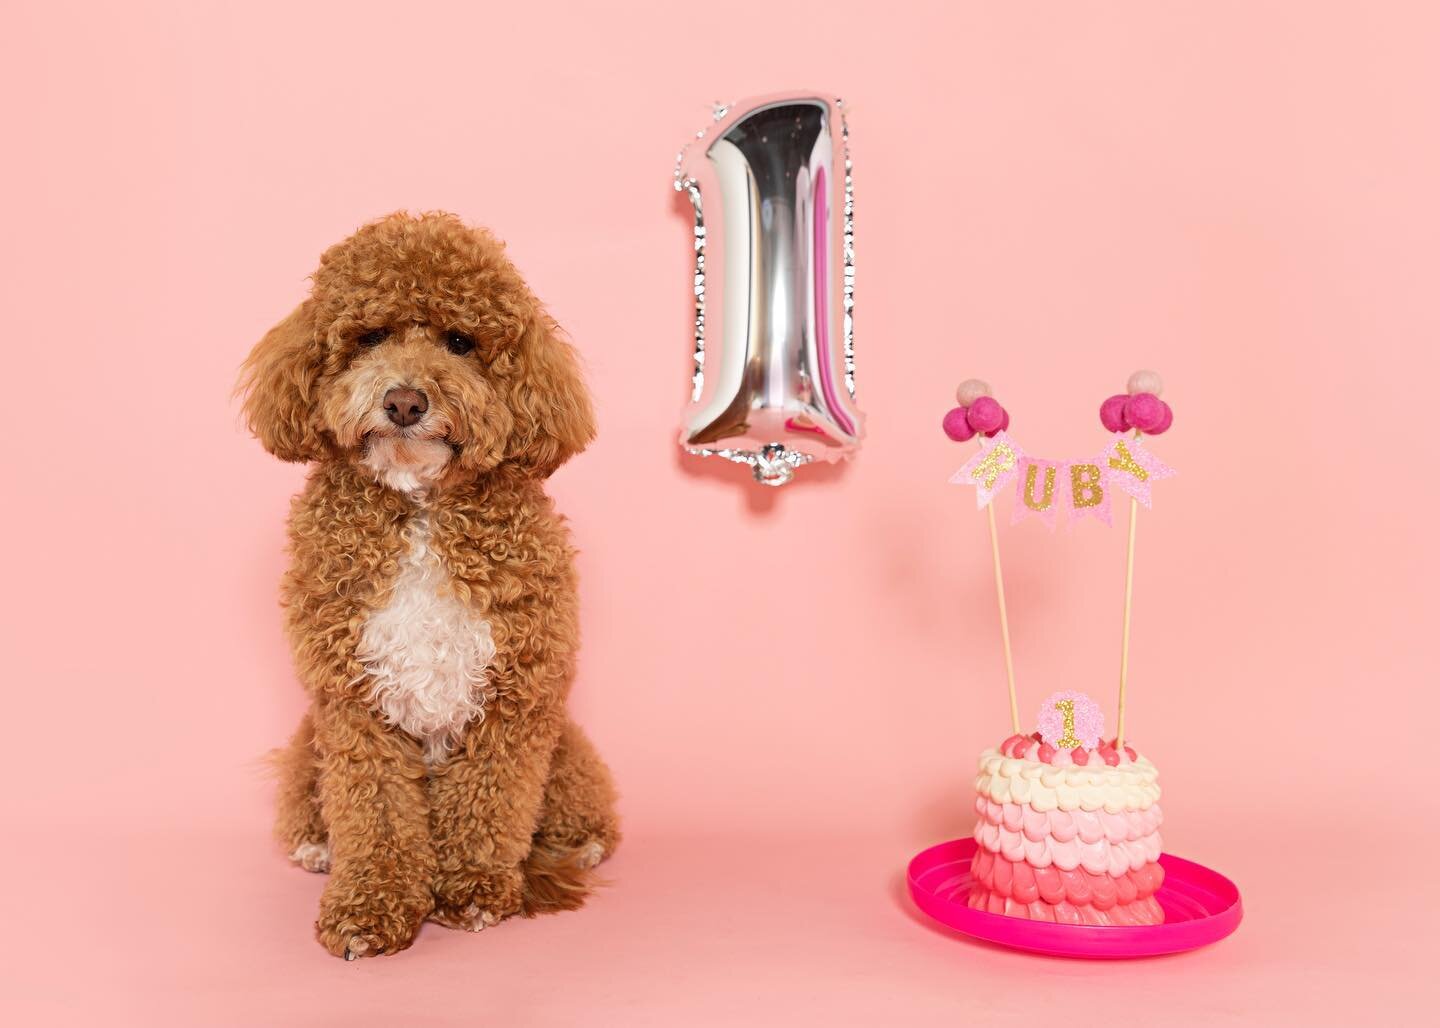 Is your furry baby&rsquo;s birthday or gotcha day coming up? Don&rsquo;t let your dog&rsquo;s birthday pass by without a celebration! Not only is it a chance to spoil your pup with treat and toys, but it&rsquo;s also an opportunity to create lasting 